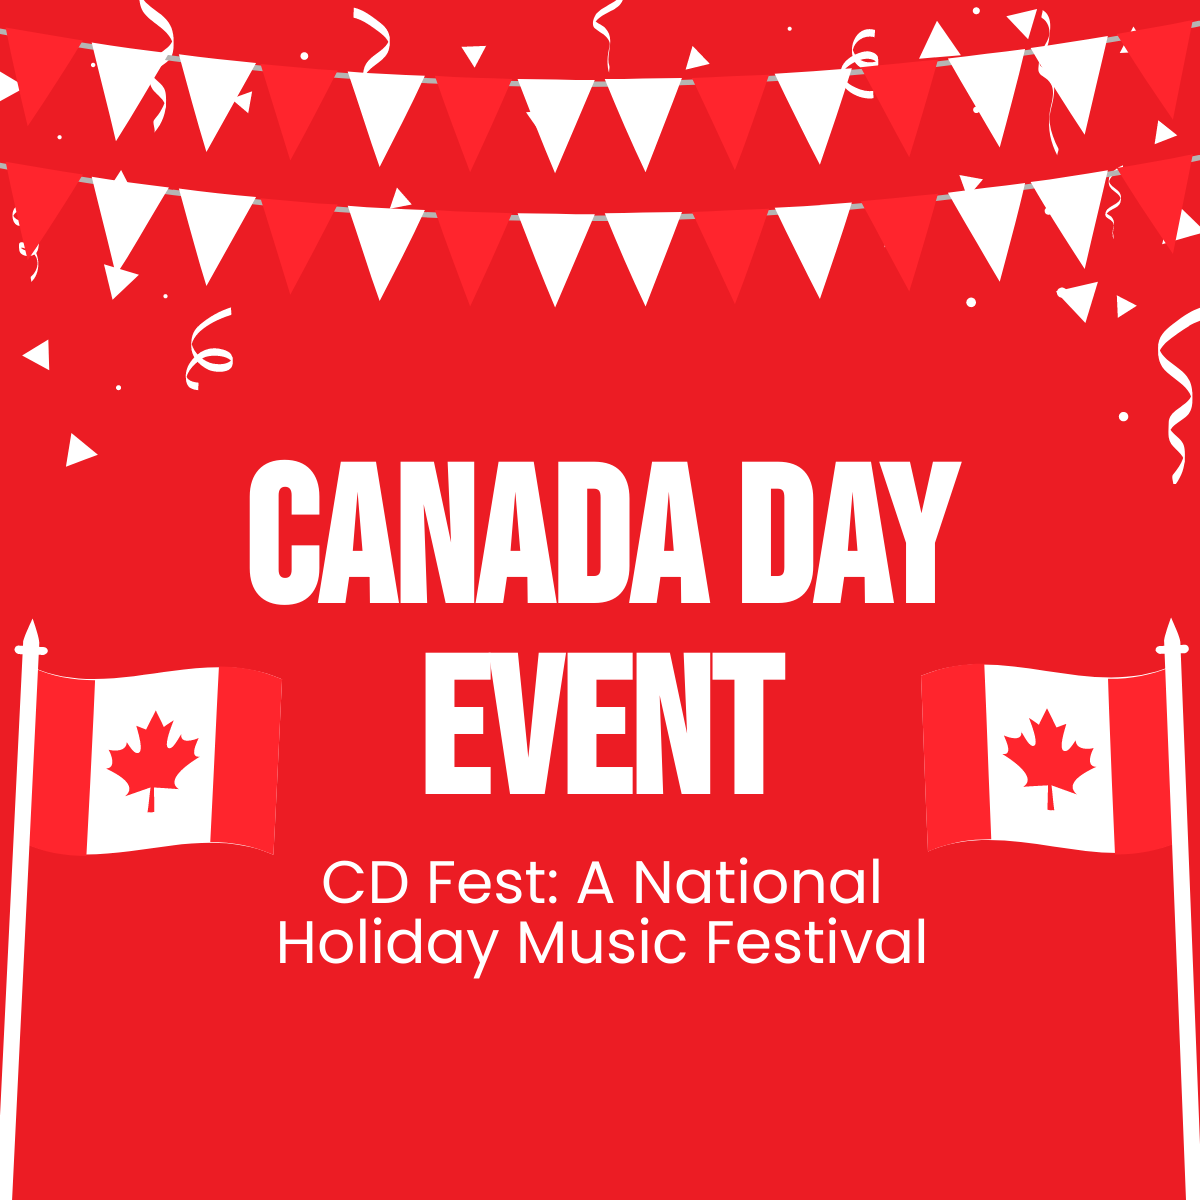 Canada Day Event Linkedin Post